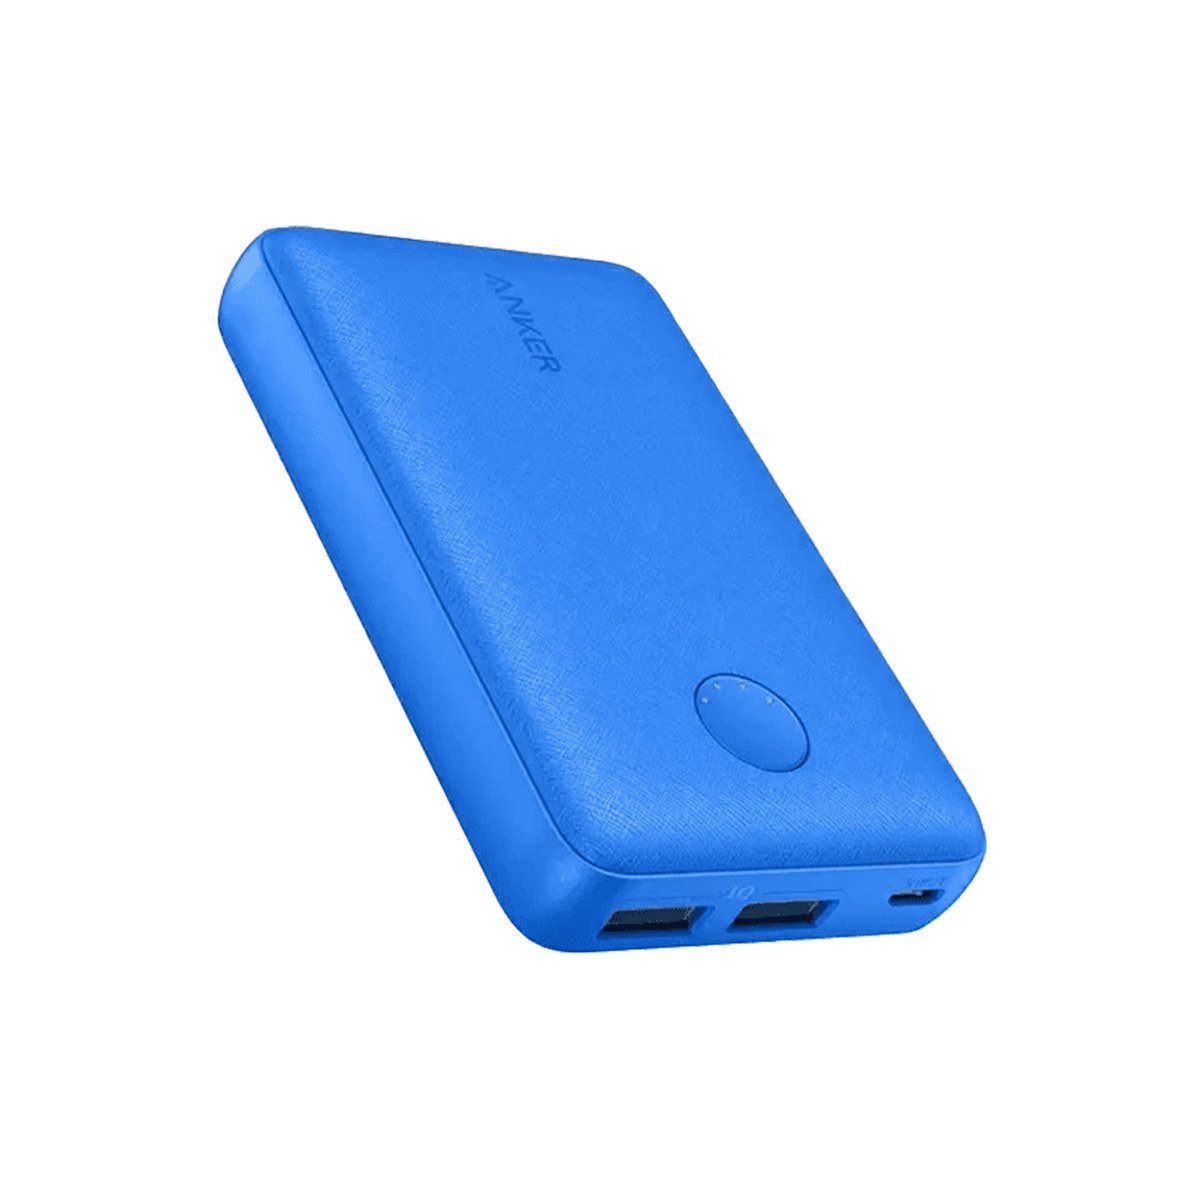 Anker Power Bank 10000 mAh A1223H31 Blue Online at Best Price